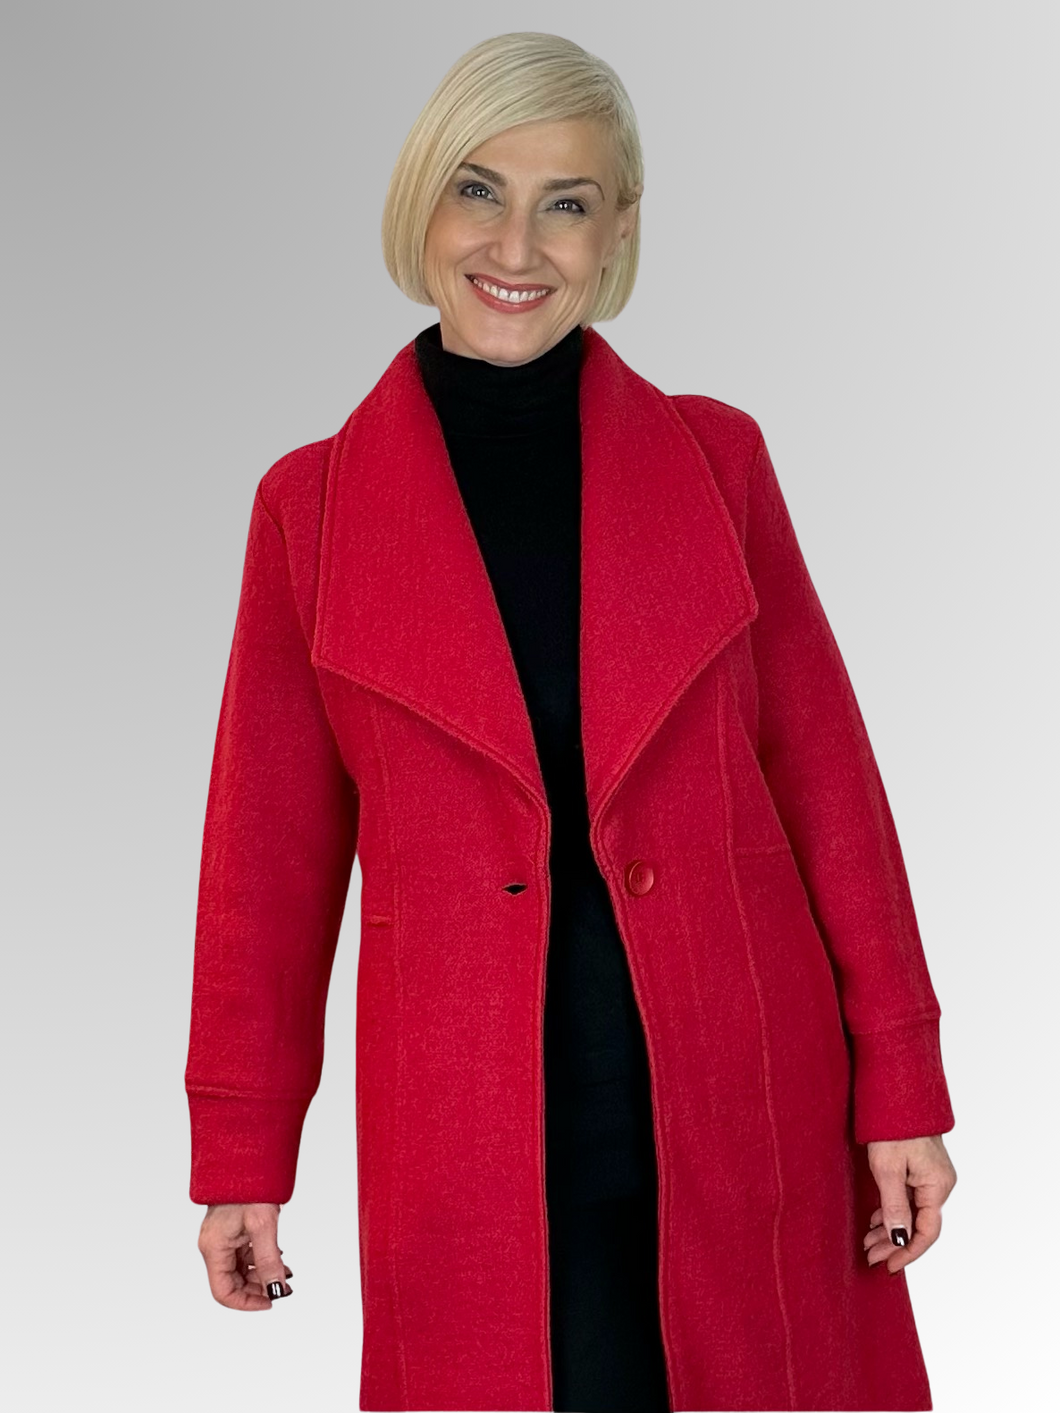 Wrap yourself in luxury with our Boiled Wool Red Pea Coat. Certified with the prestigious Woolmark label, this modern, soft boiled wool coat is both warm and stylish. Featuring a contemporary take on the classic coat, it's the perfect statement piece for any fashion-forward wardrobe. Upgrade your look and embrace true quality.